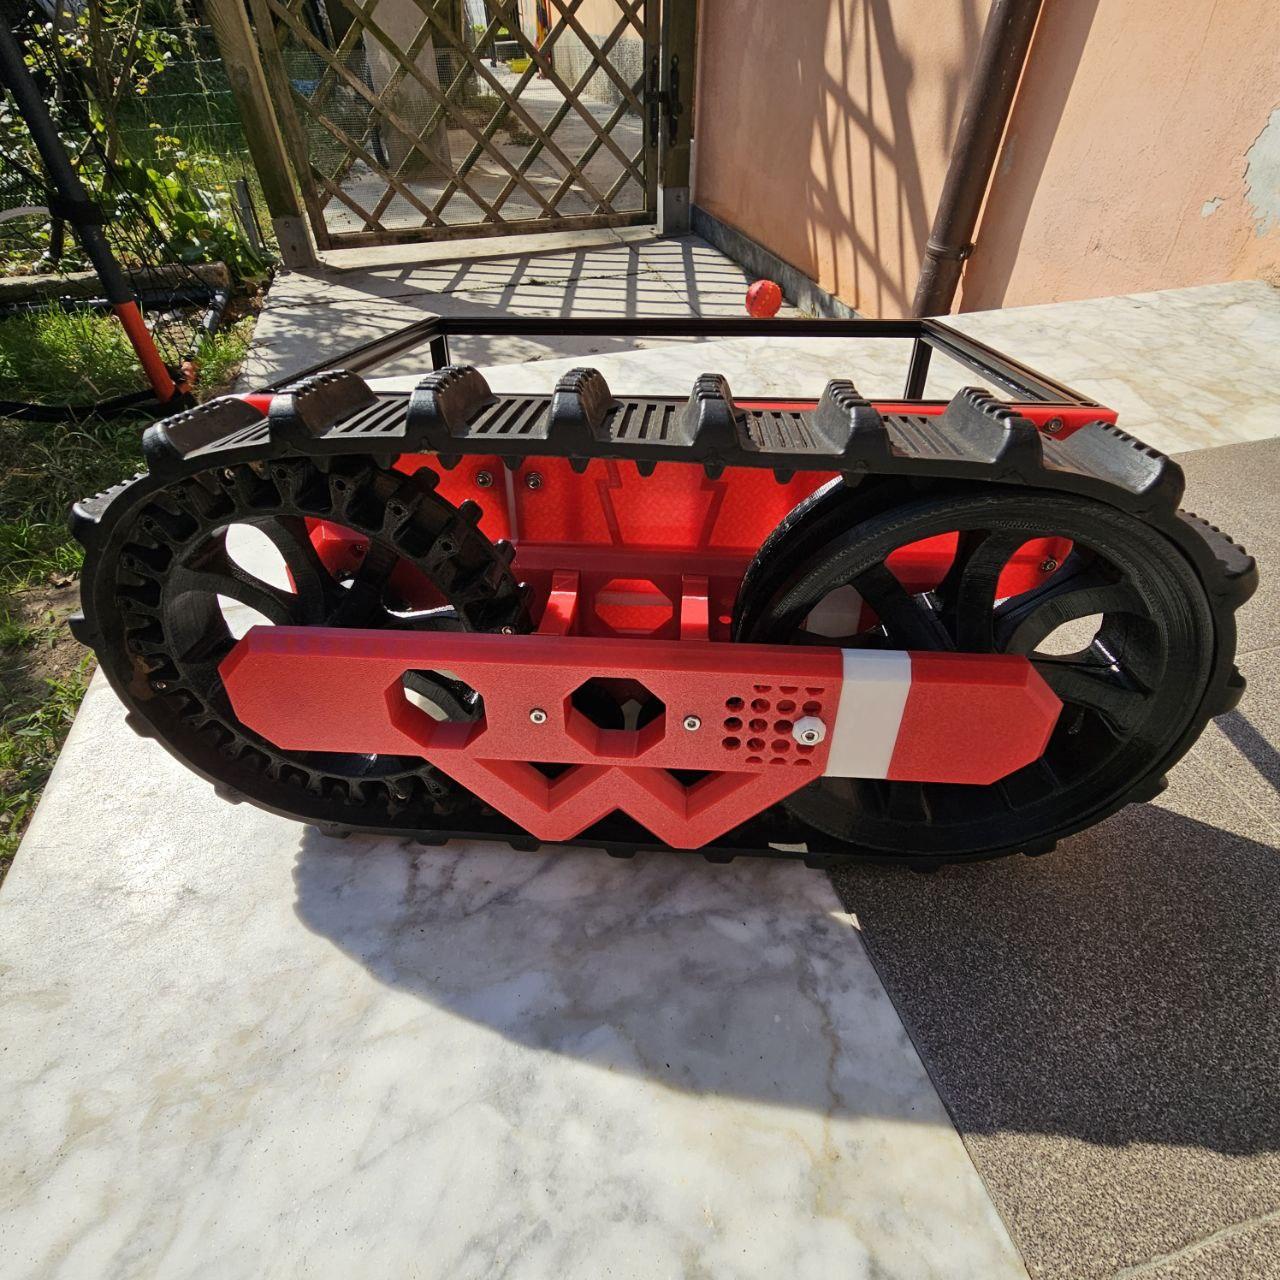 MyzharBot v5 - A fully 3D printed intelligent ground robot